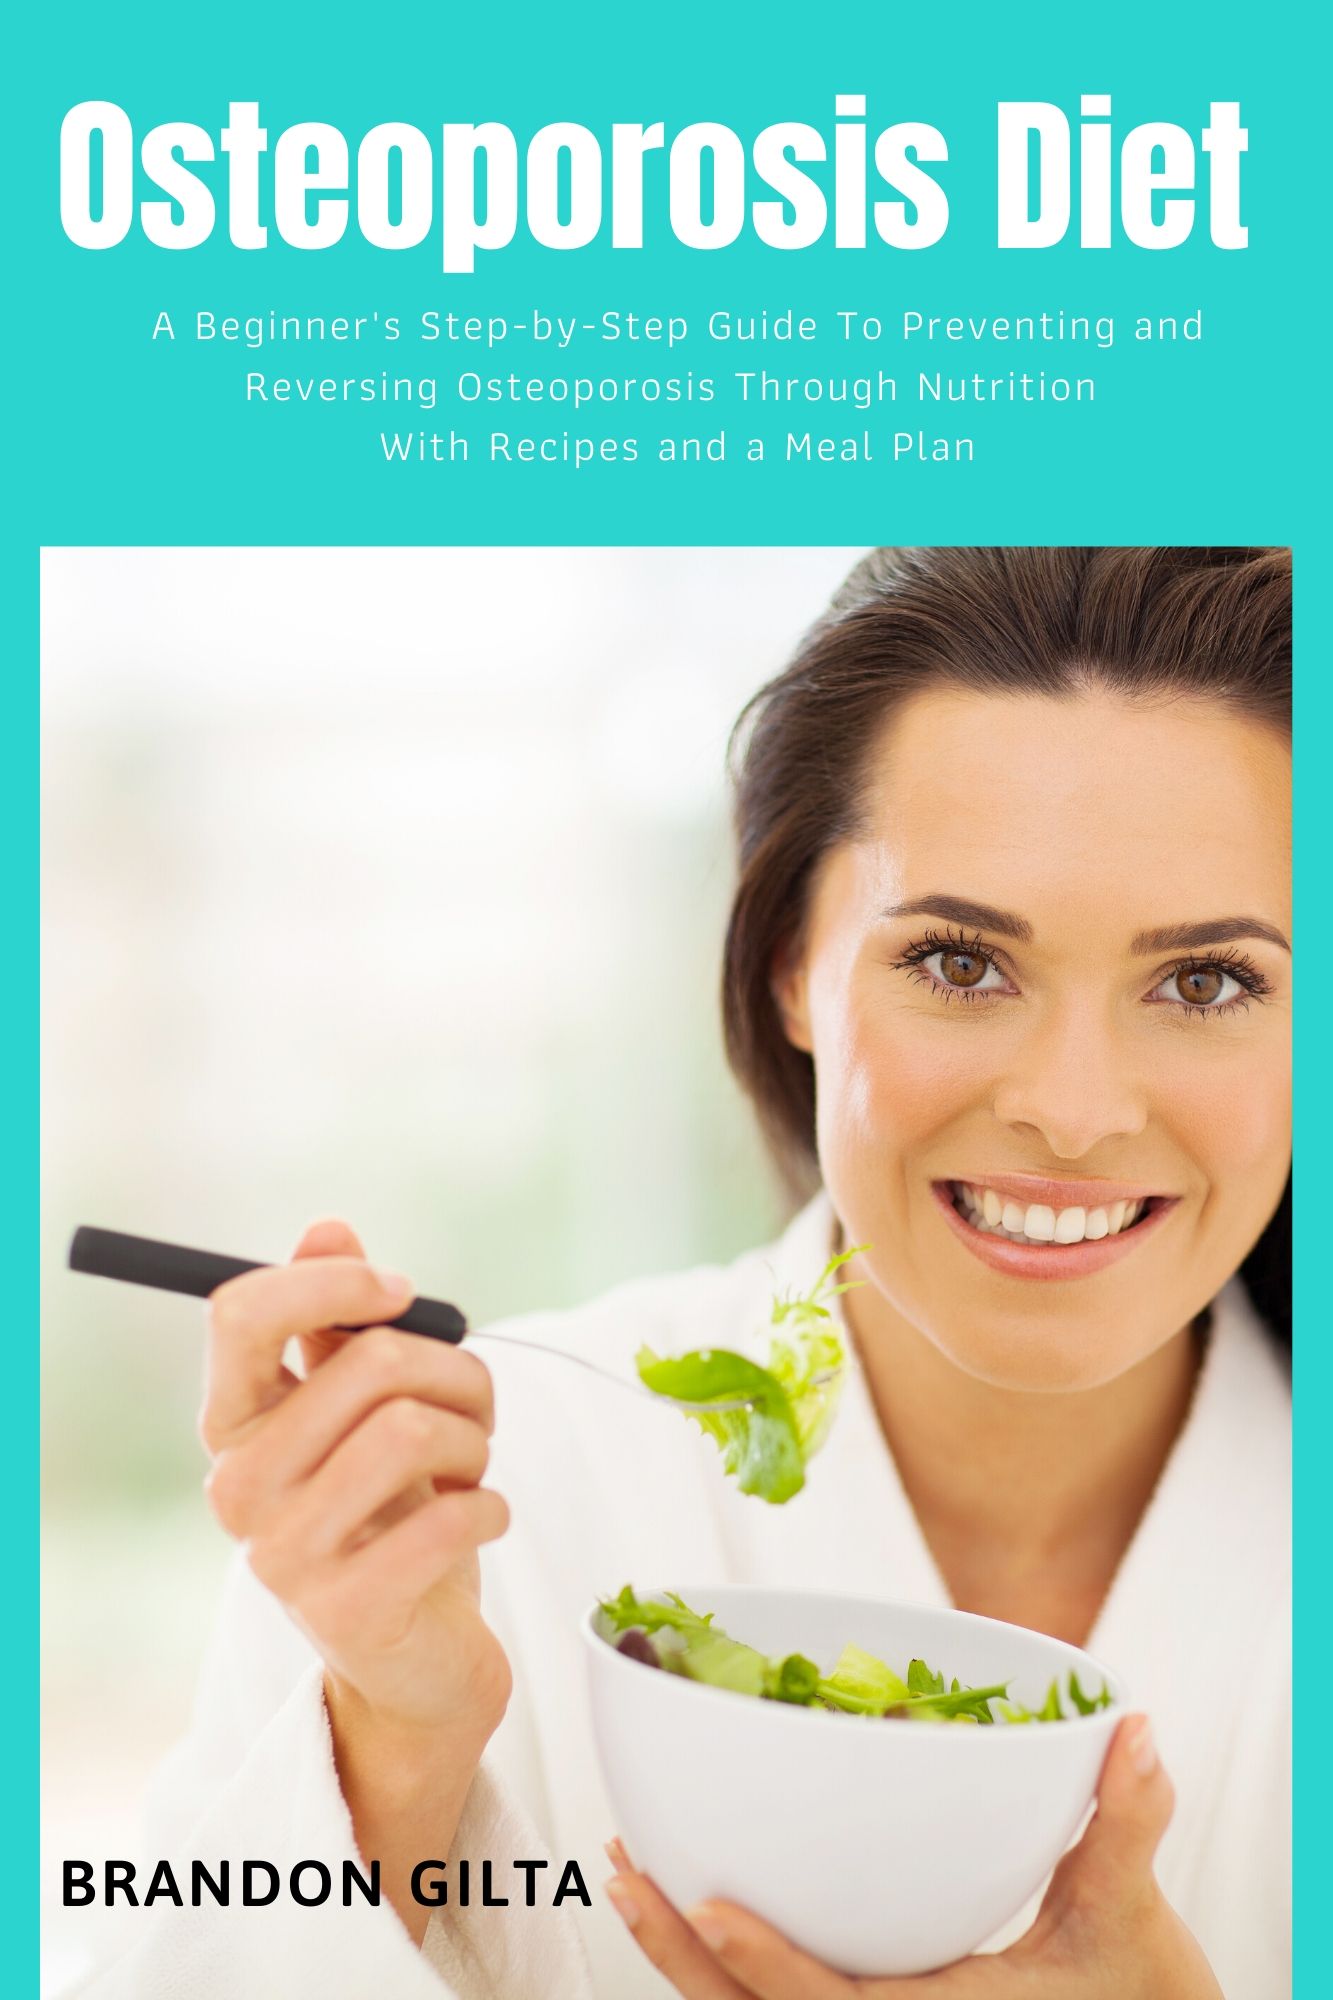 FREE: Osteoporosis Diet: A Beginner’s Step-by-Step Guide To Preventing and Reversing Osteoporosis Through Nutrition by Brandon Gilta